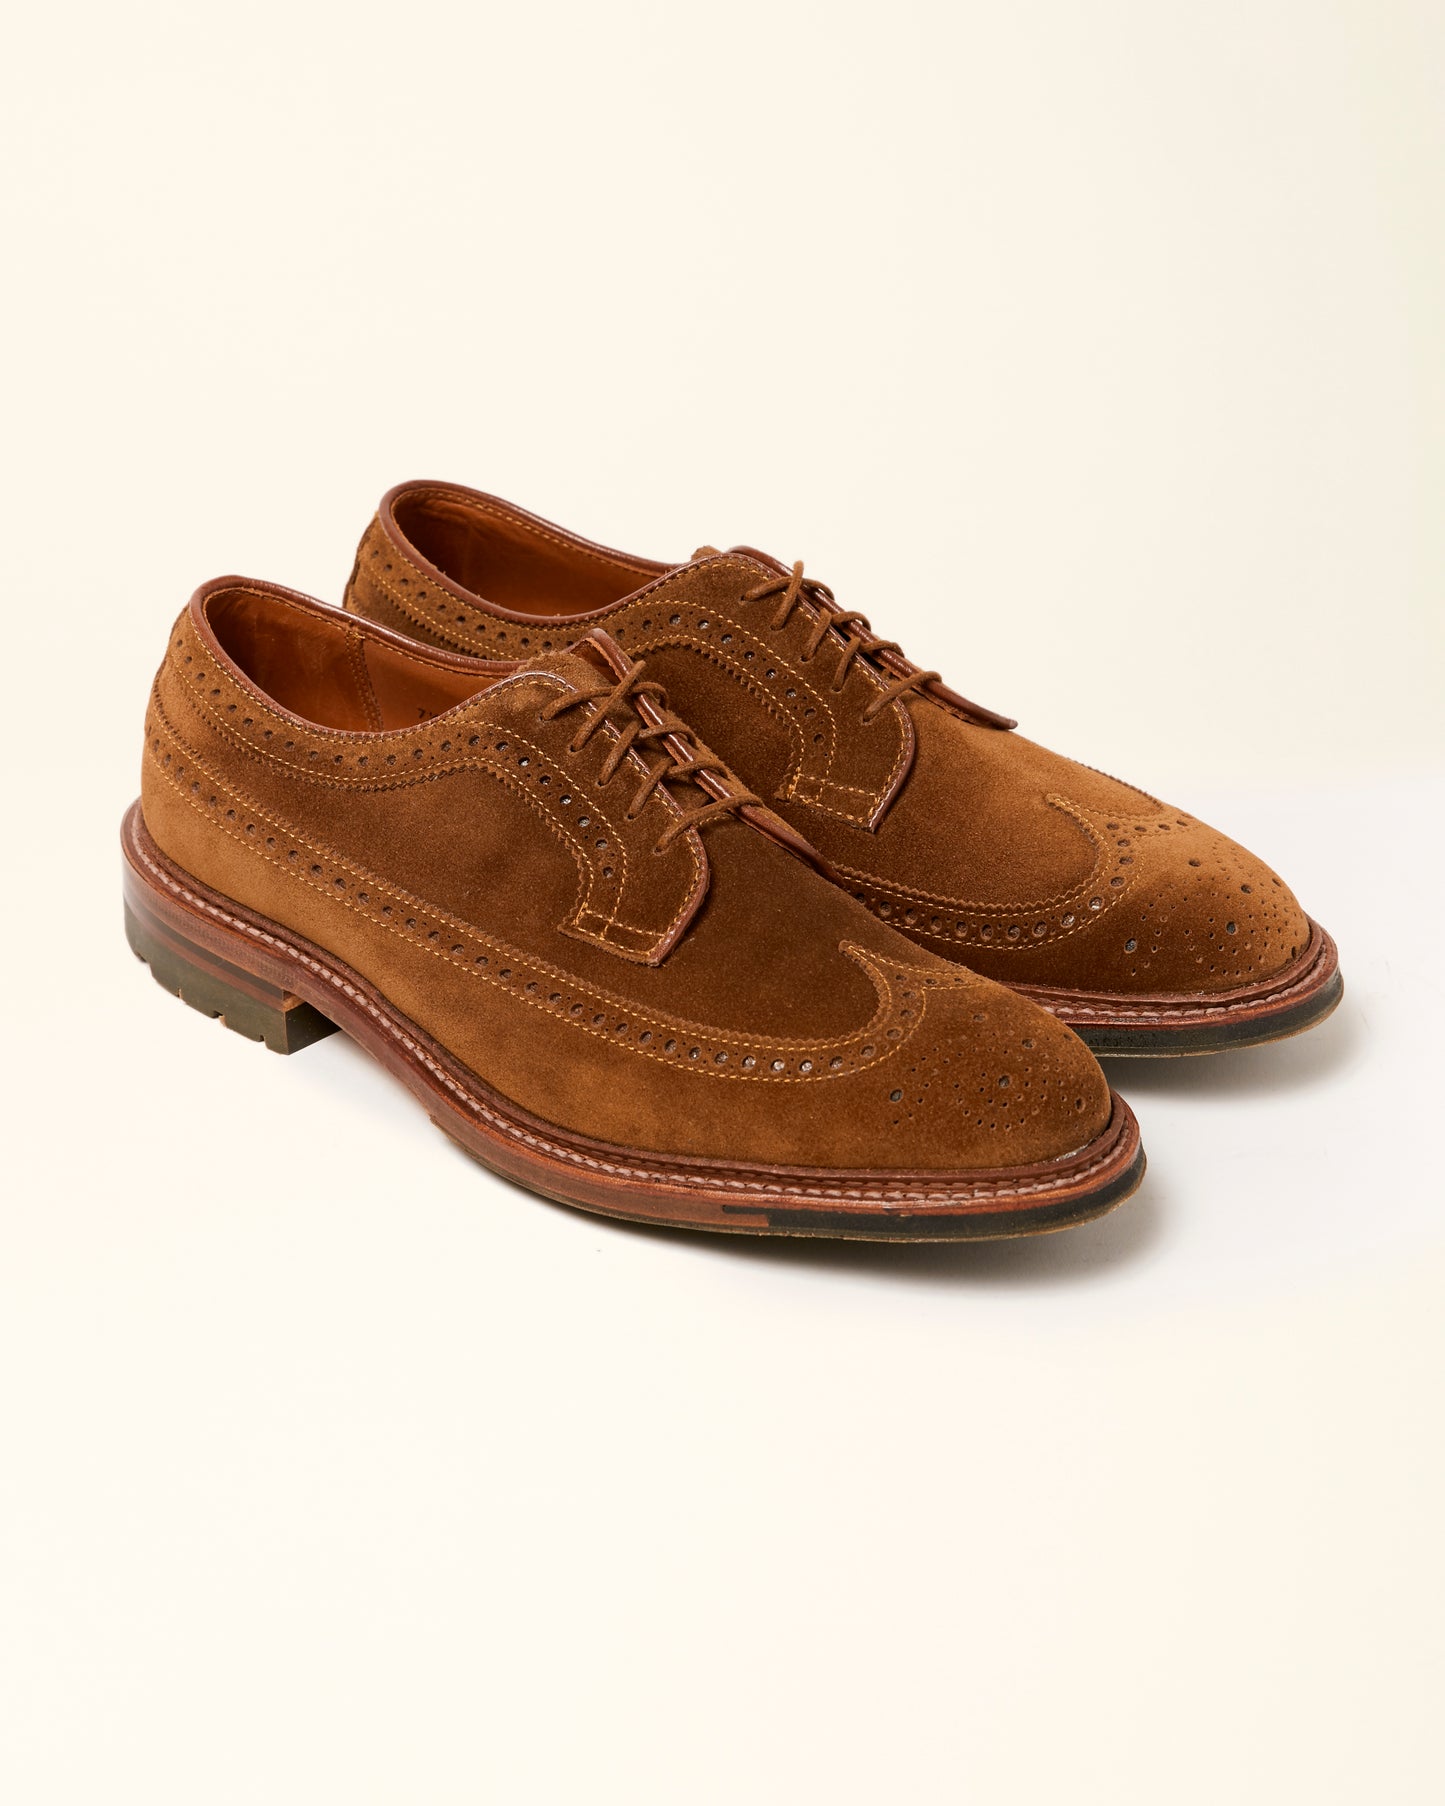 "Pike" Snuff Suede Longwing Blucher